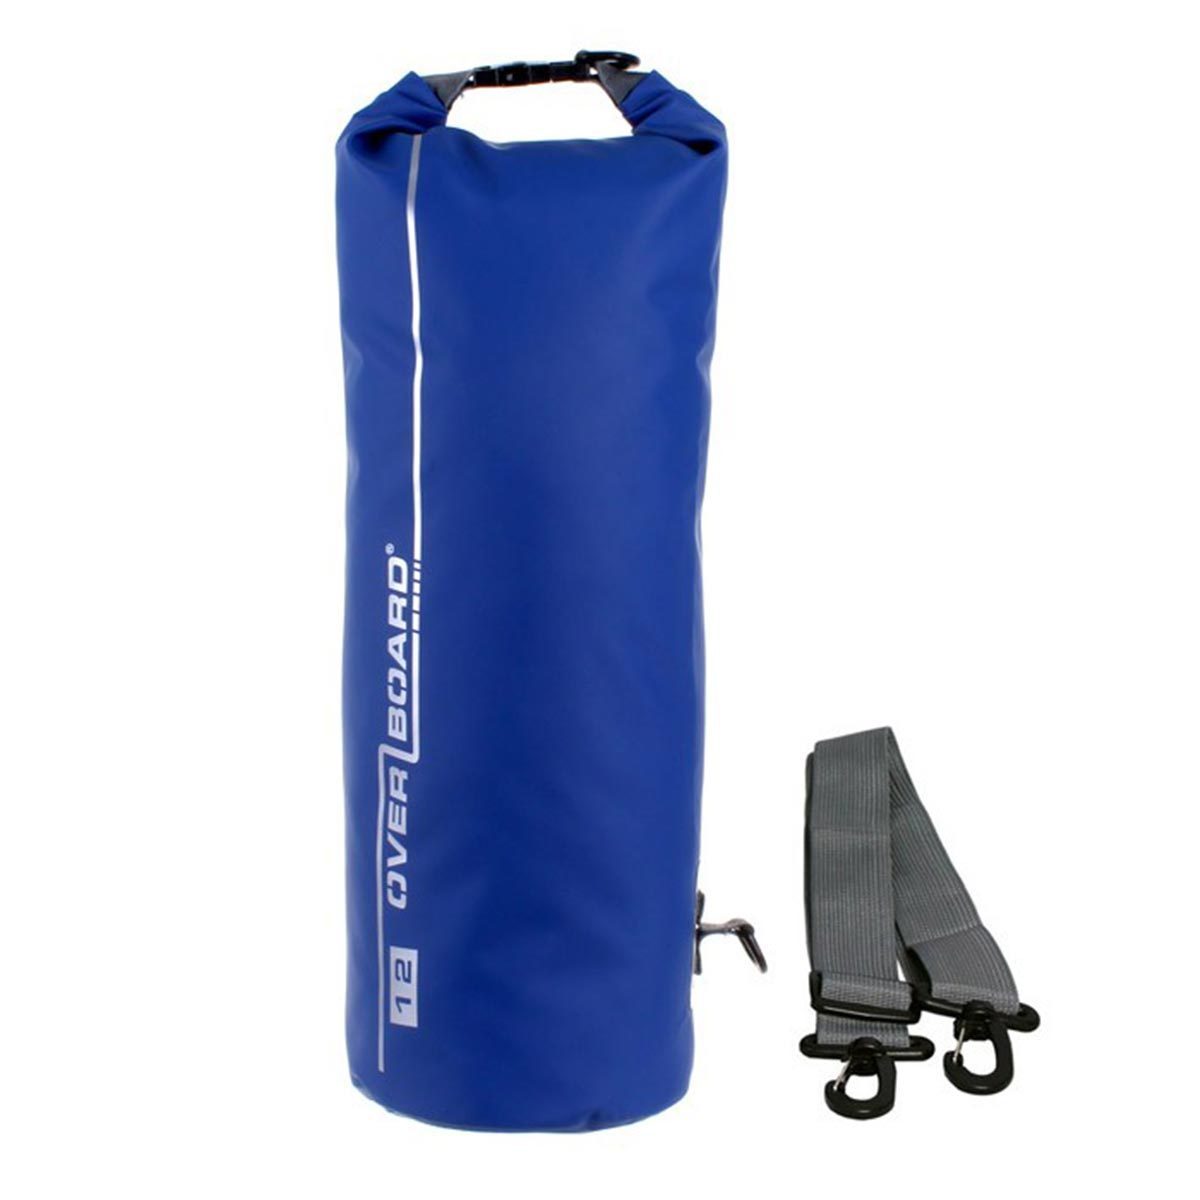 Overboard 12 Litre Dry Tube Bag Bags, Packs and Cases Overboard Black Tactical Gear Supplier Tactical Distributors Australia